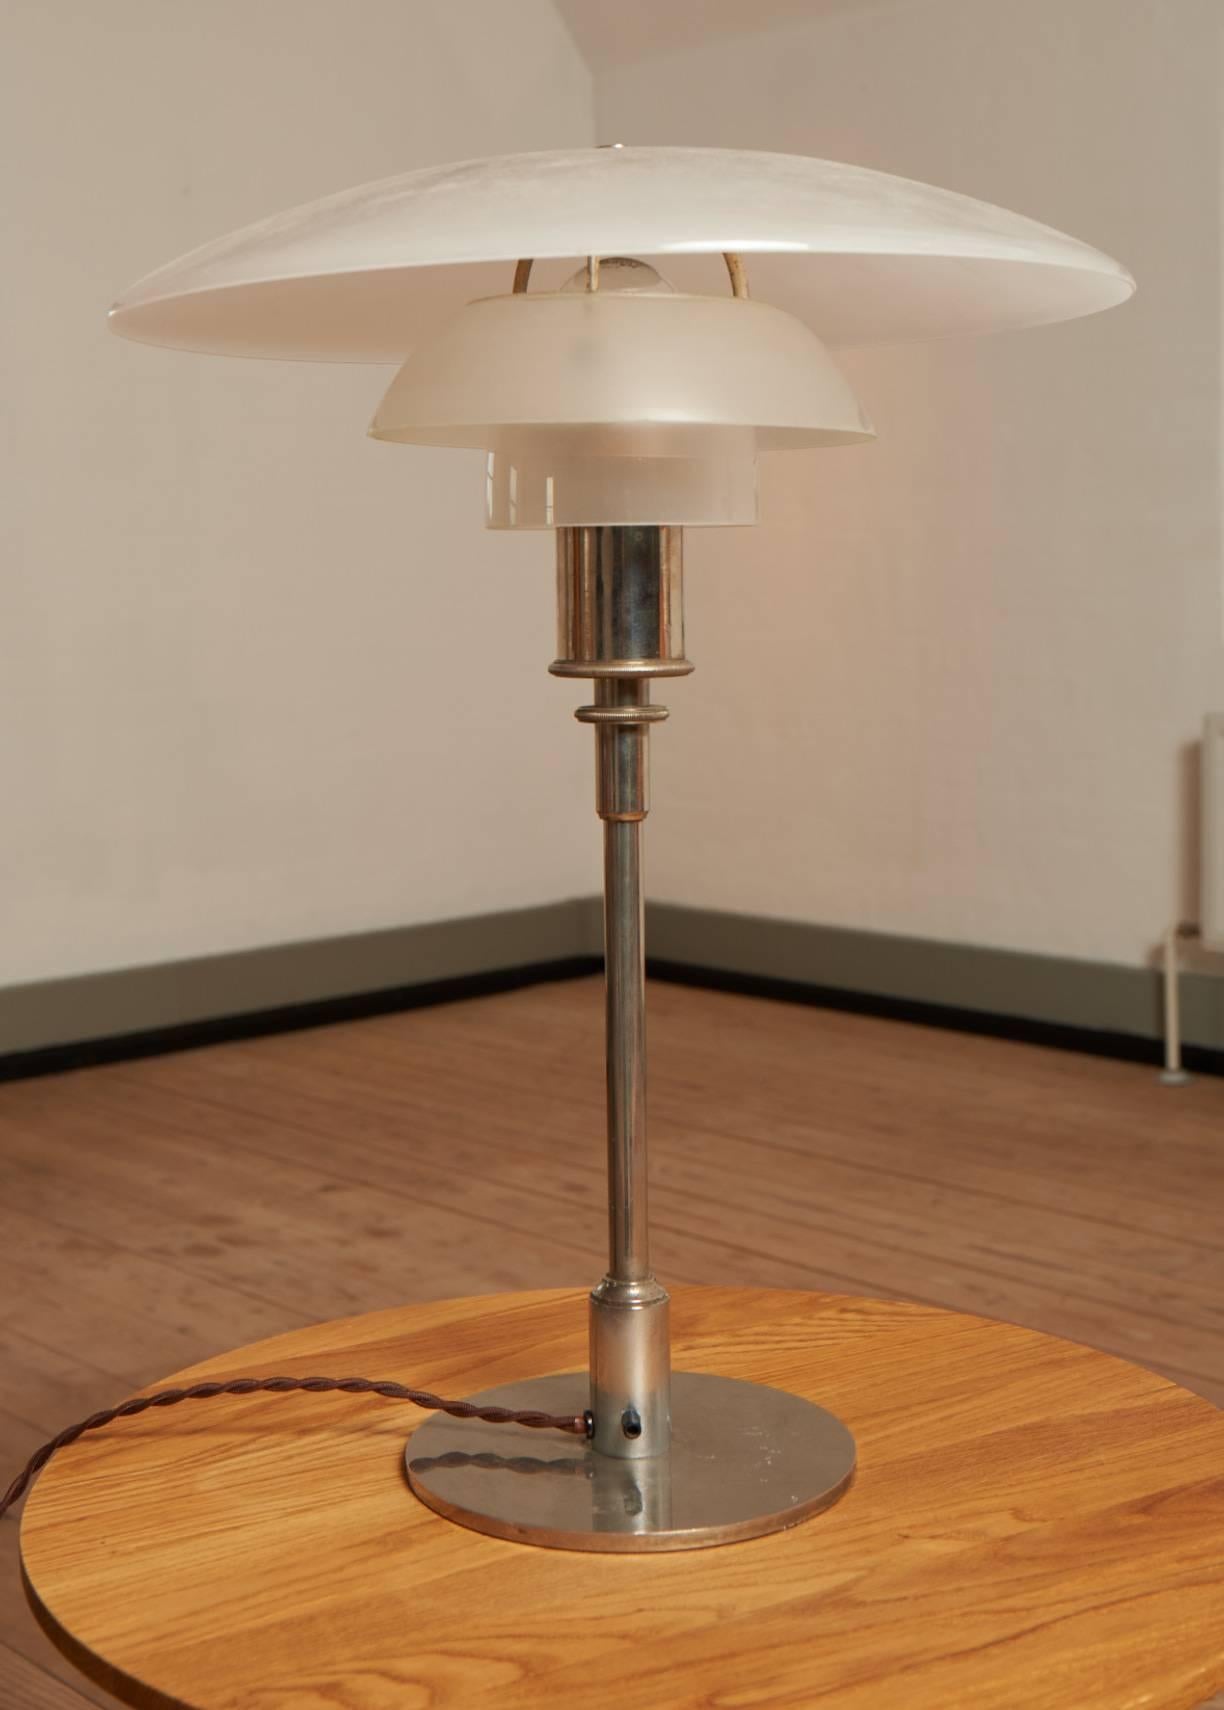 Poul Henningsen 4/3 table lamp from the early 1930s with frozen glass and nickel-plated brass.
The lamp is 100% original and stamped 